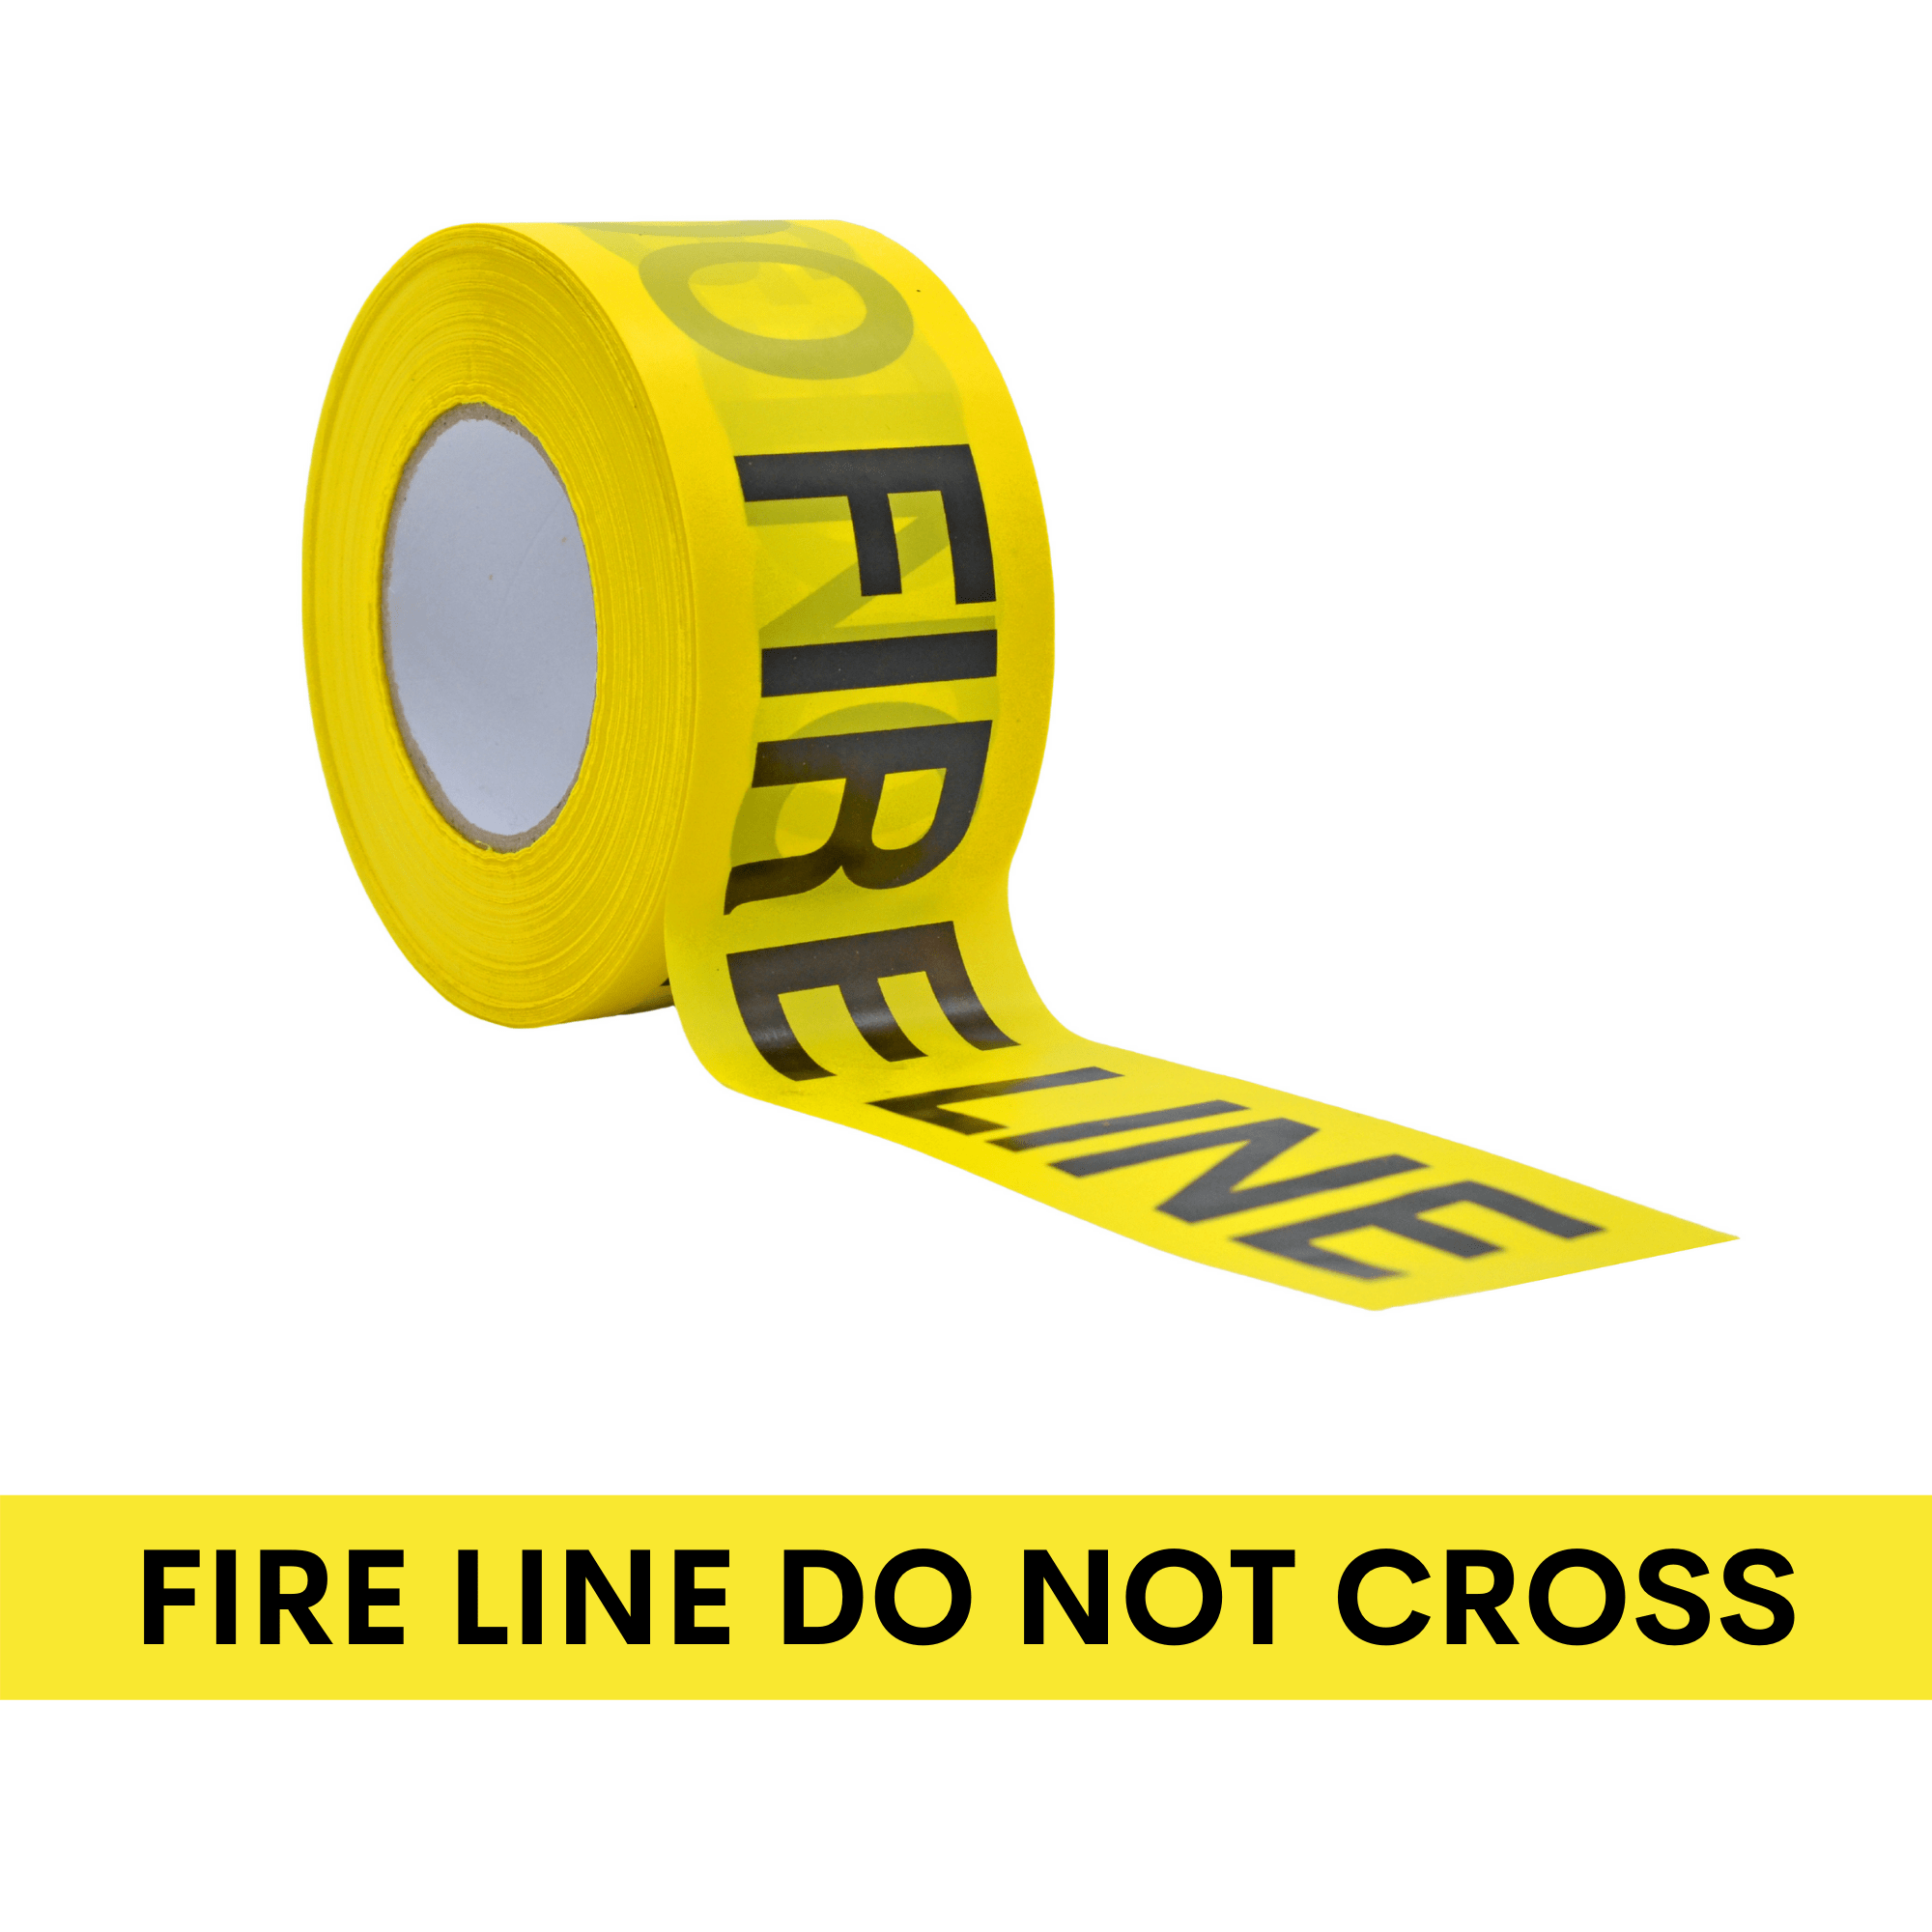 WOD Barricade Flagging Tape ''Fire Line Do Not Cross'' 3 inch x 1000 ft. - Hazardous Areas, Safety for Construction Zones BRC